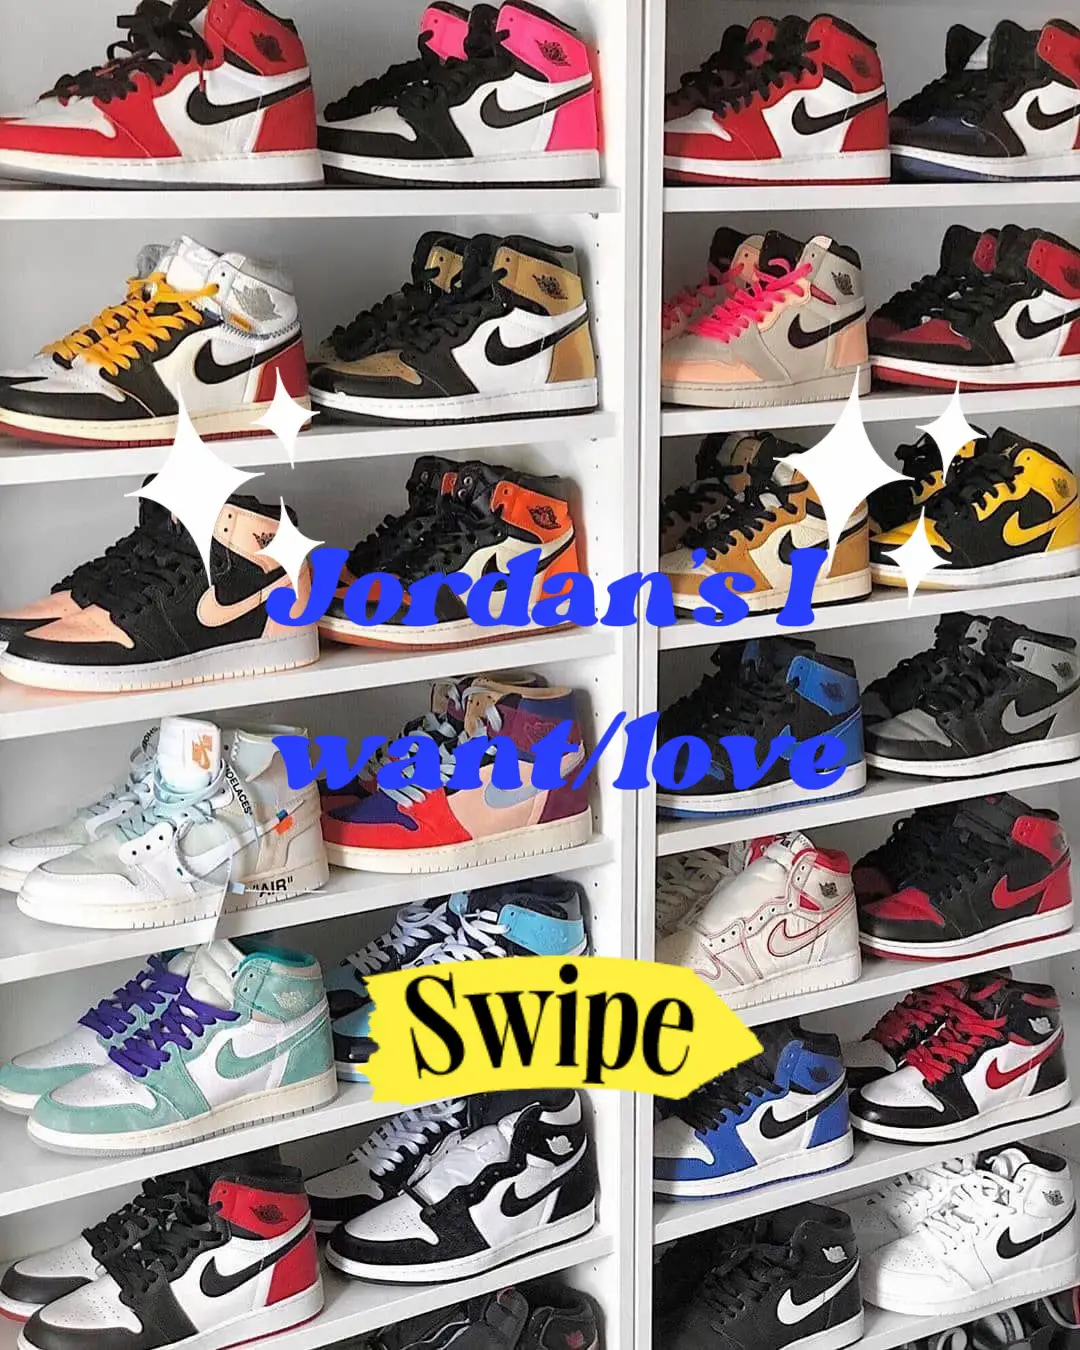 My 10 favorite sandals/spring shoes 🤌 Comment “links” below ⬇️ if you  would like me to DM you a link to shop this reel OR you